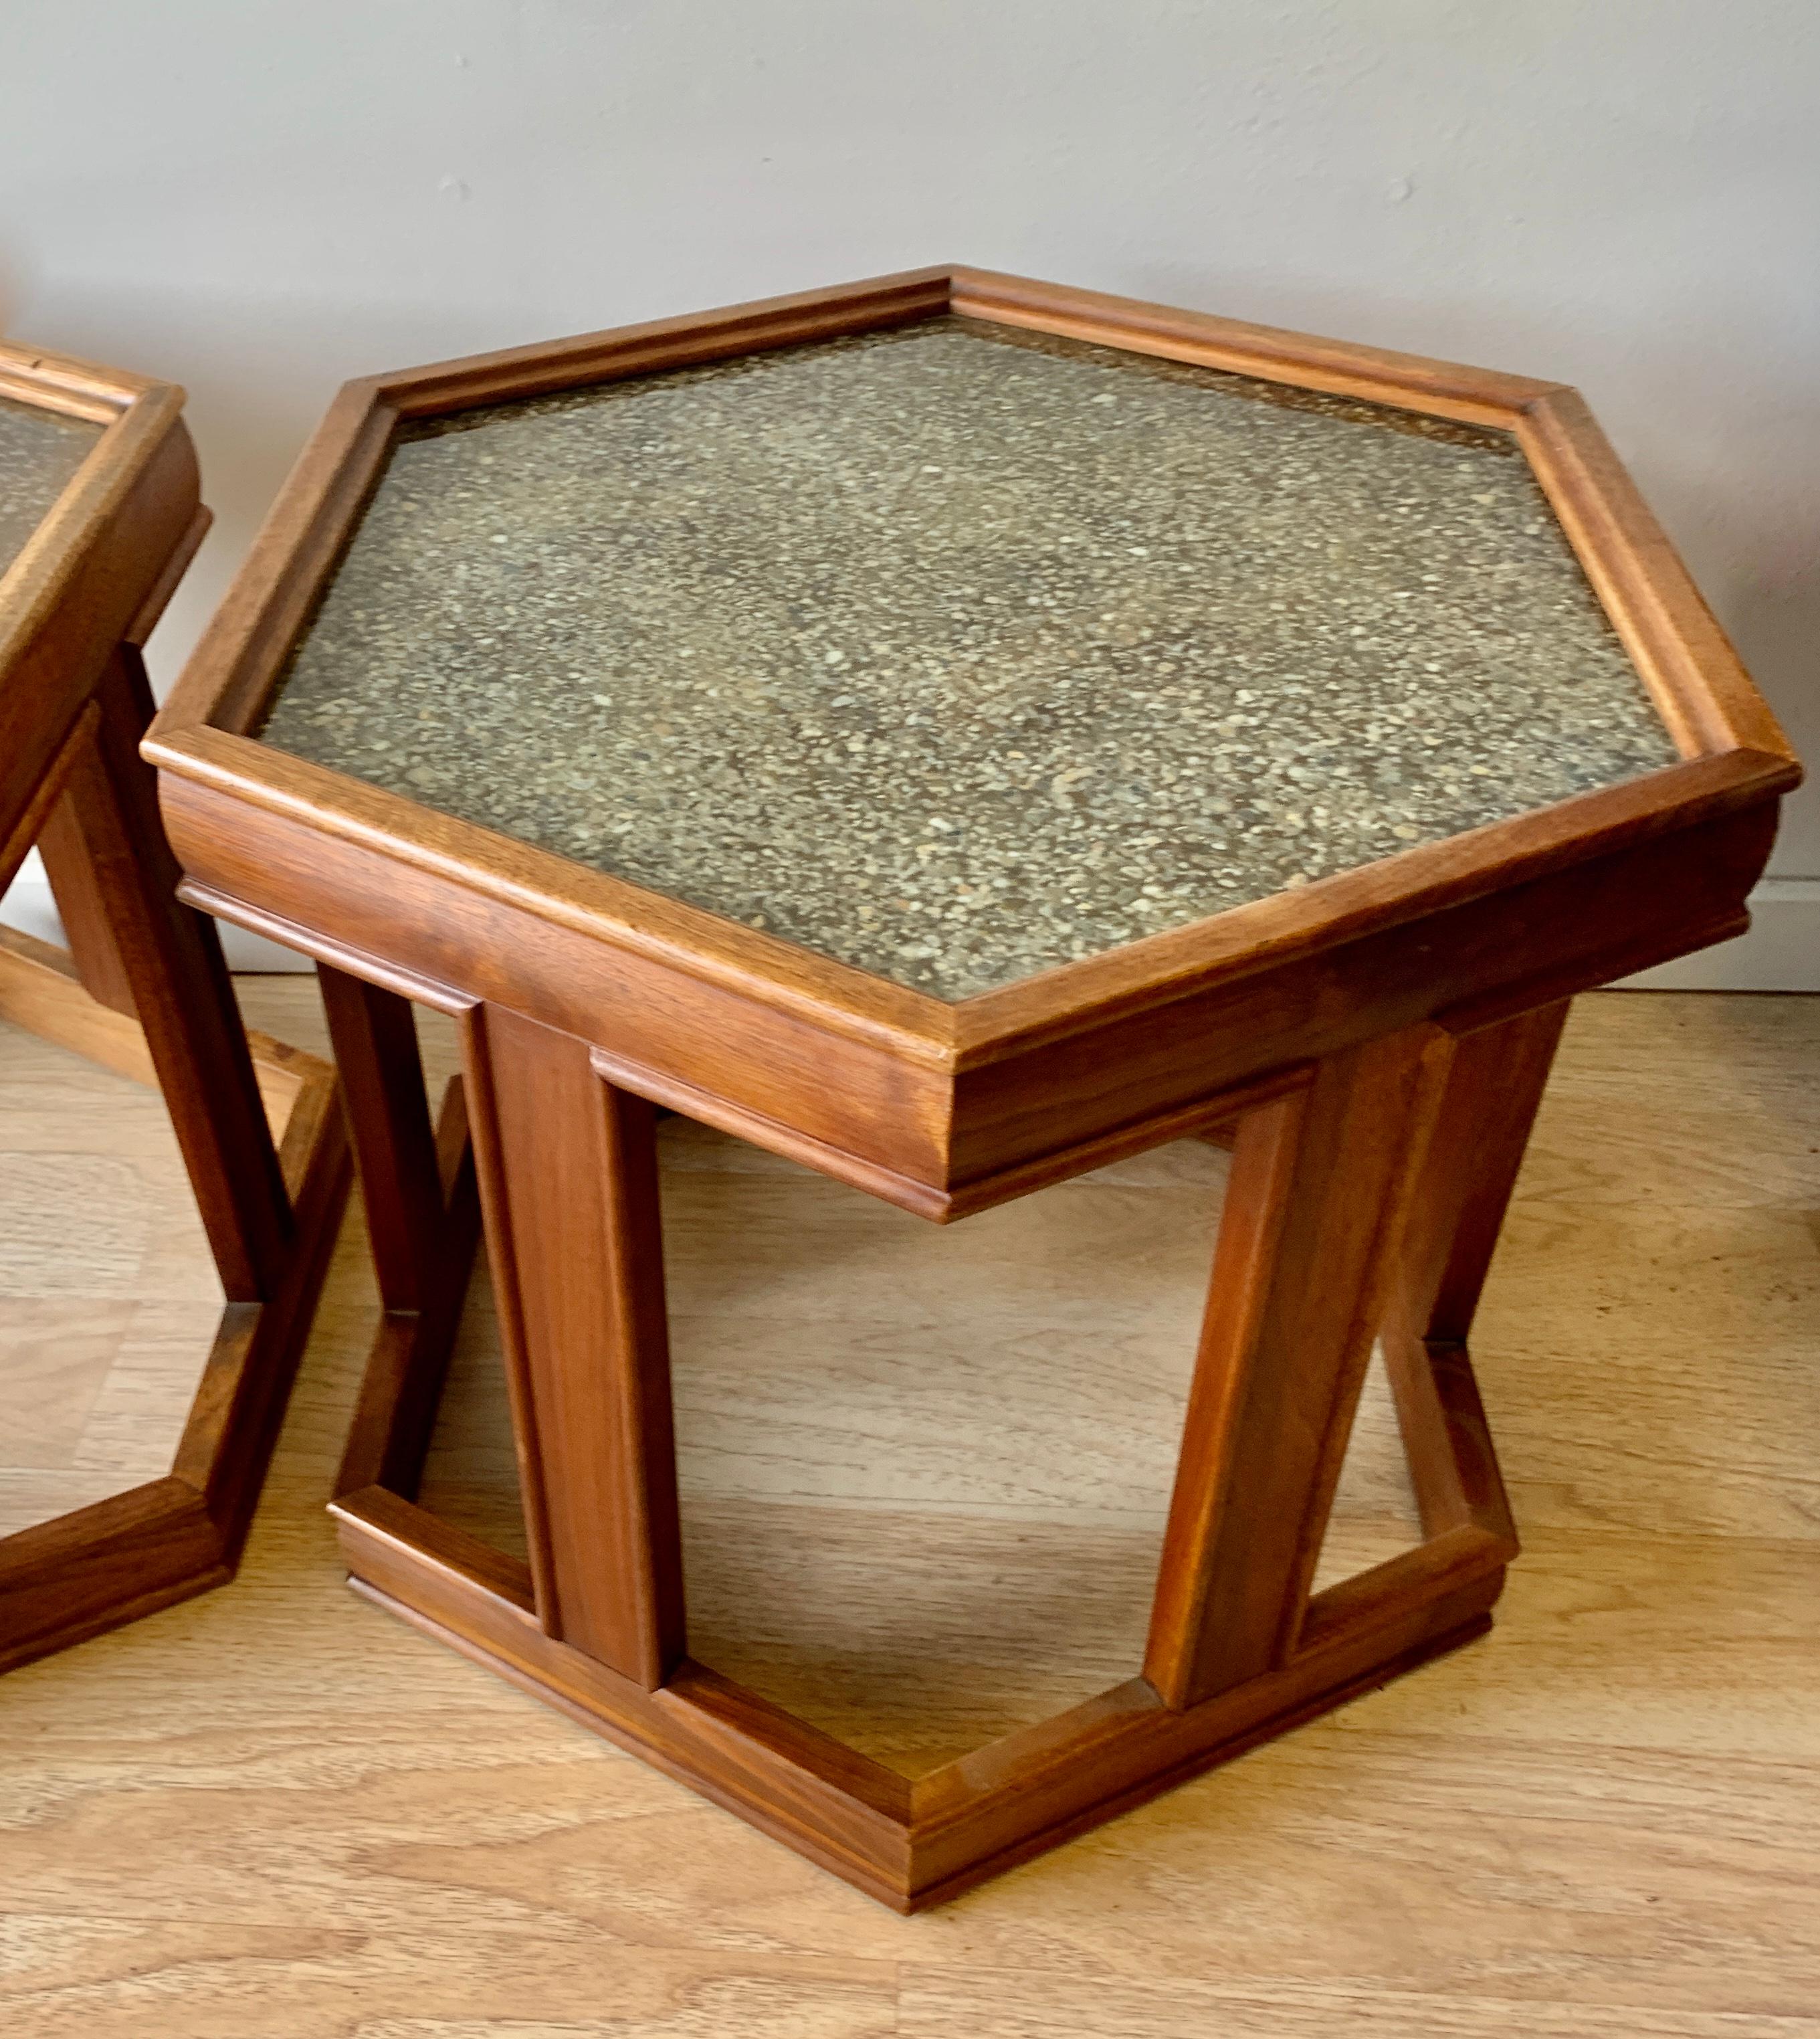 Pair of hexagonal side tables by Brown Saltman, designed by John Keal. Finished in medium walnut, with a brilliant reverse-painted and textured glass top in gold tones. The two can be used independently or as a pair to form a coffee table.